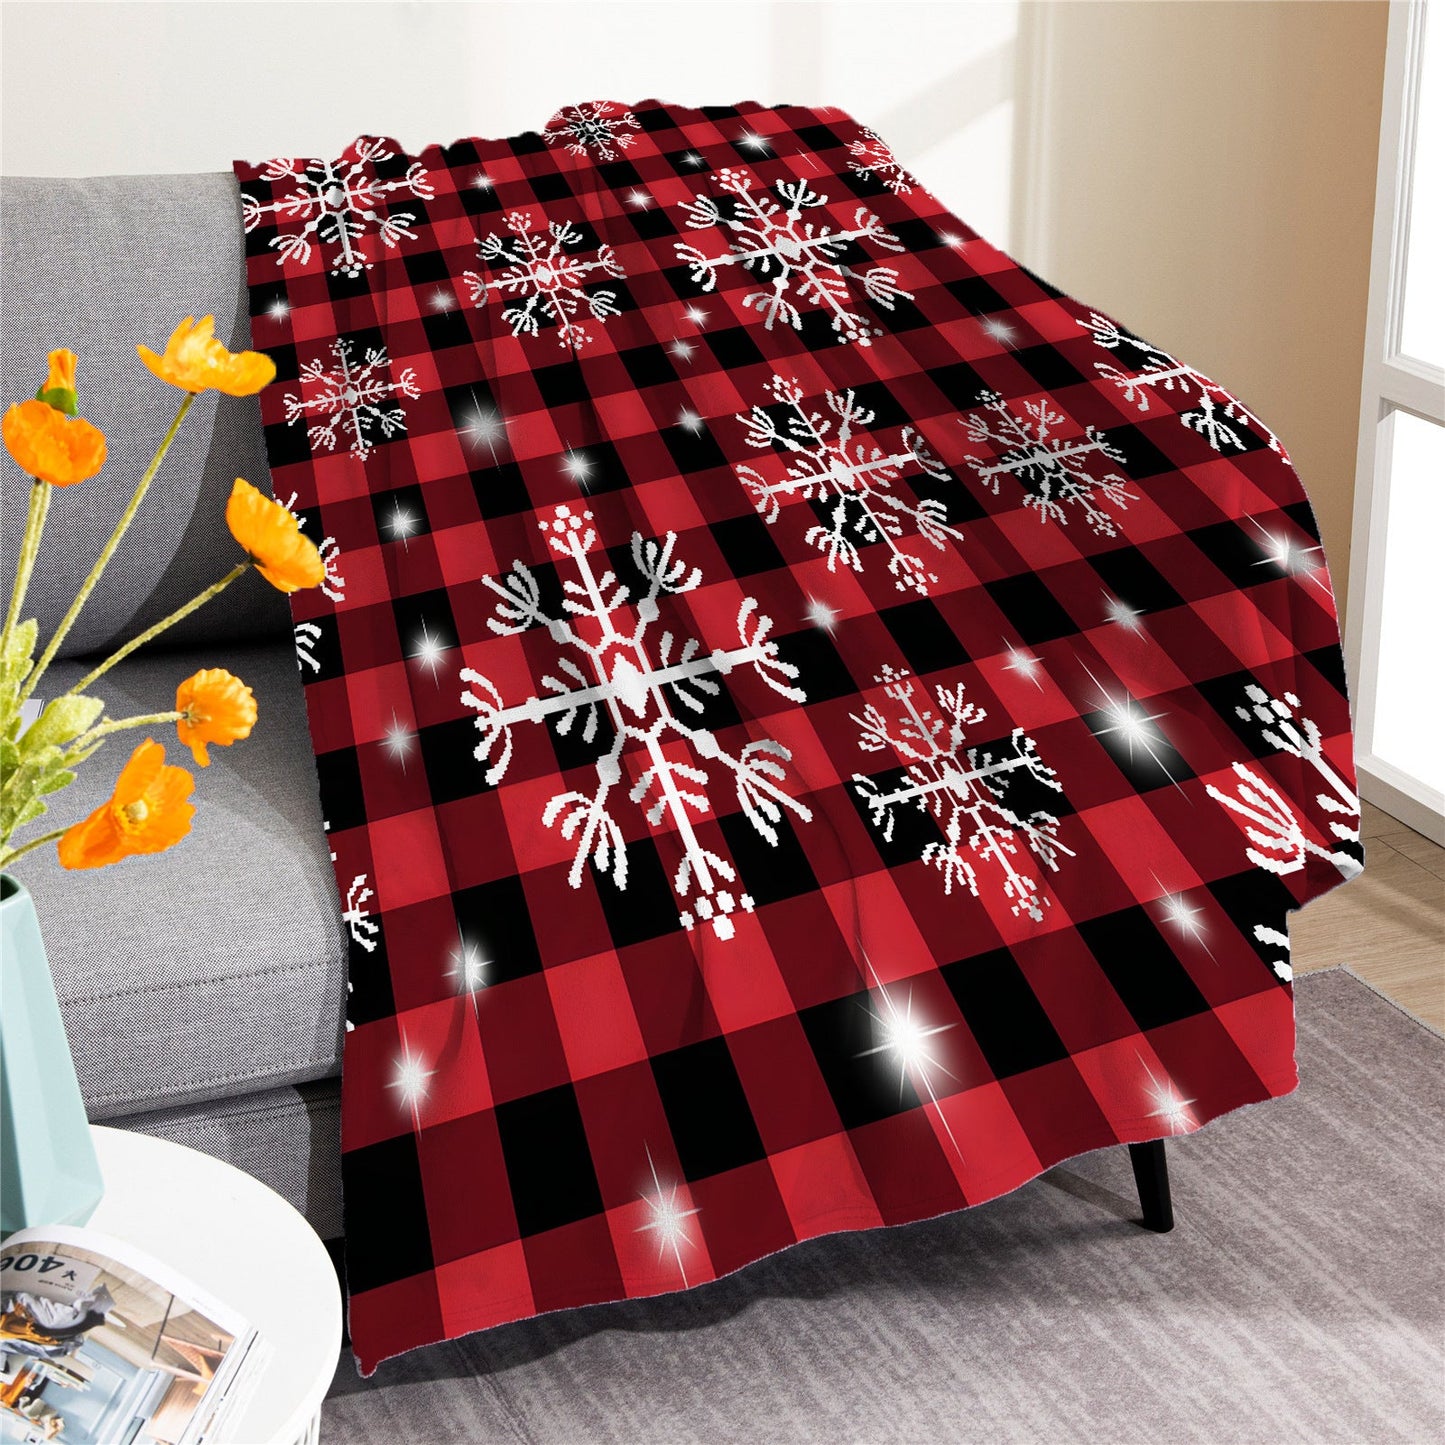 Merry Christmas Soft Fleece Throw Blankets-Blankets-M20220916-9-50*60 inches-Free Shipping at meselling99